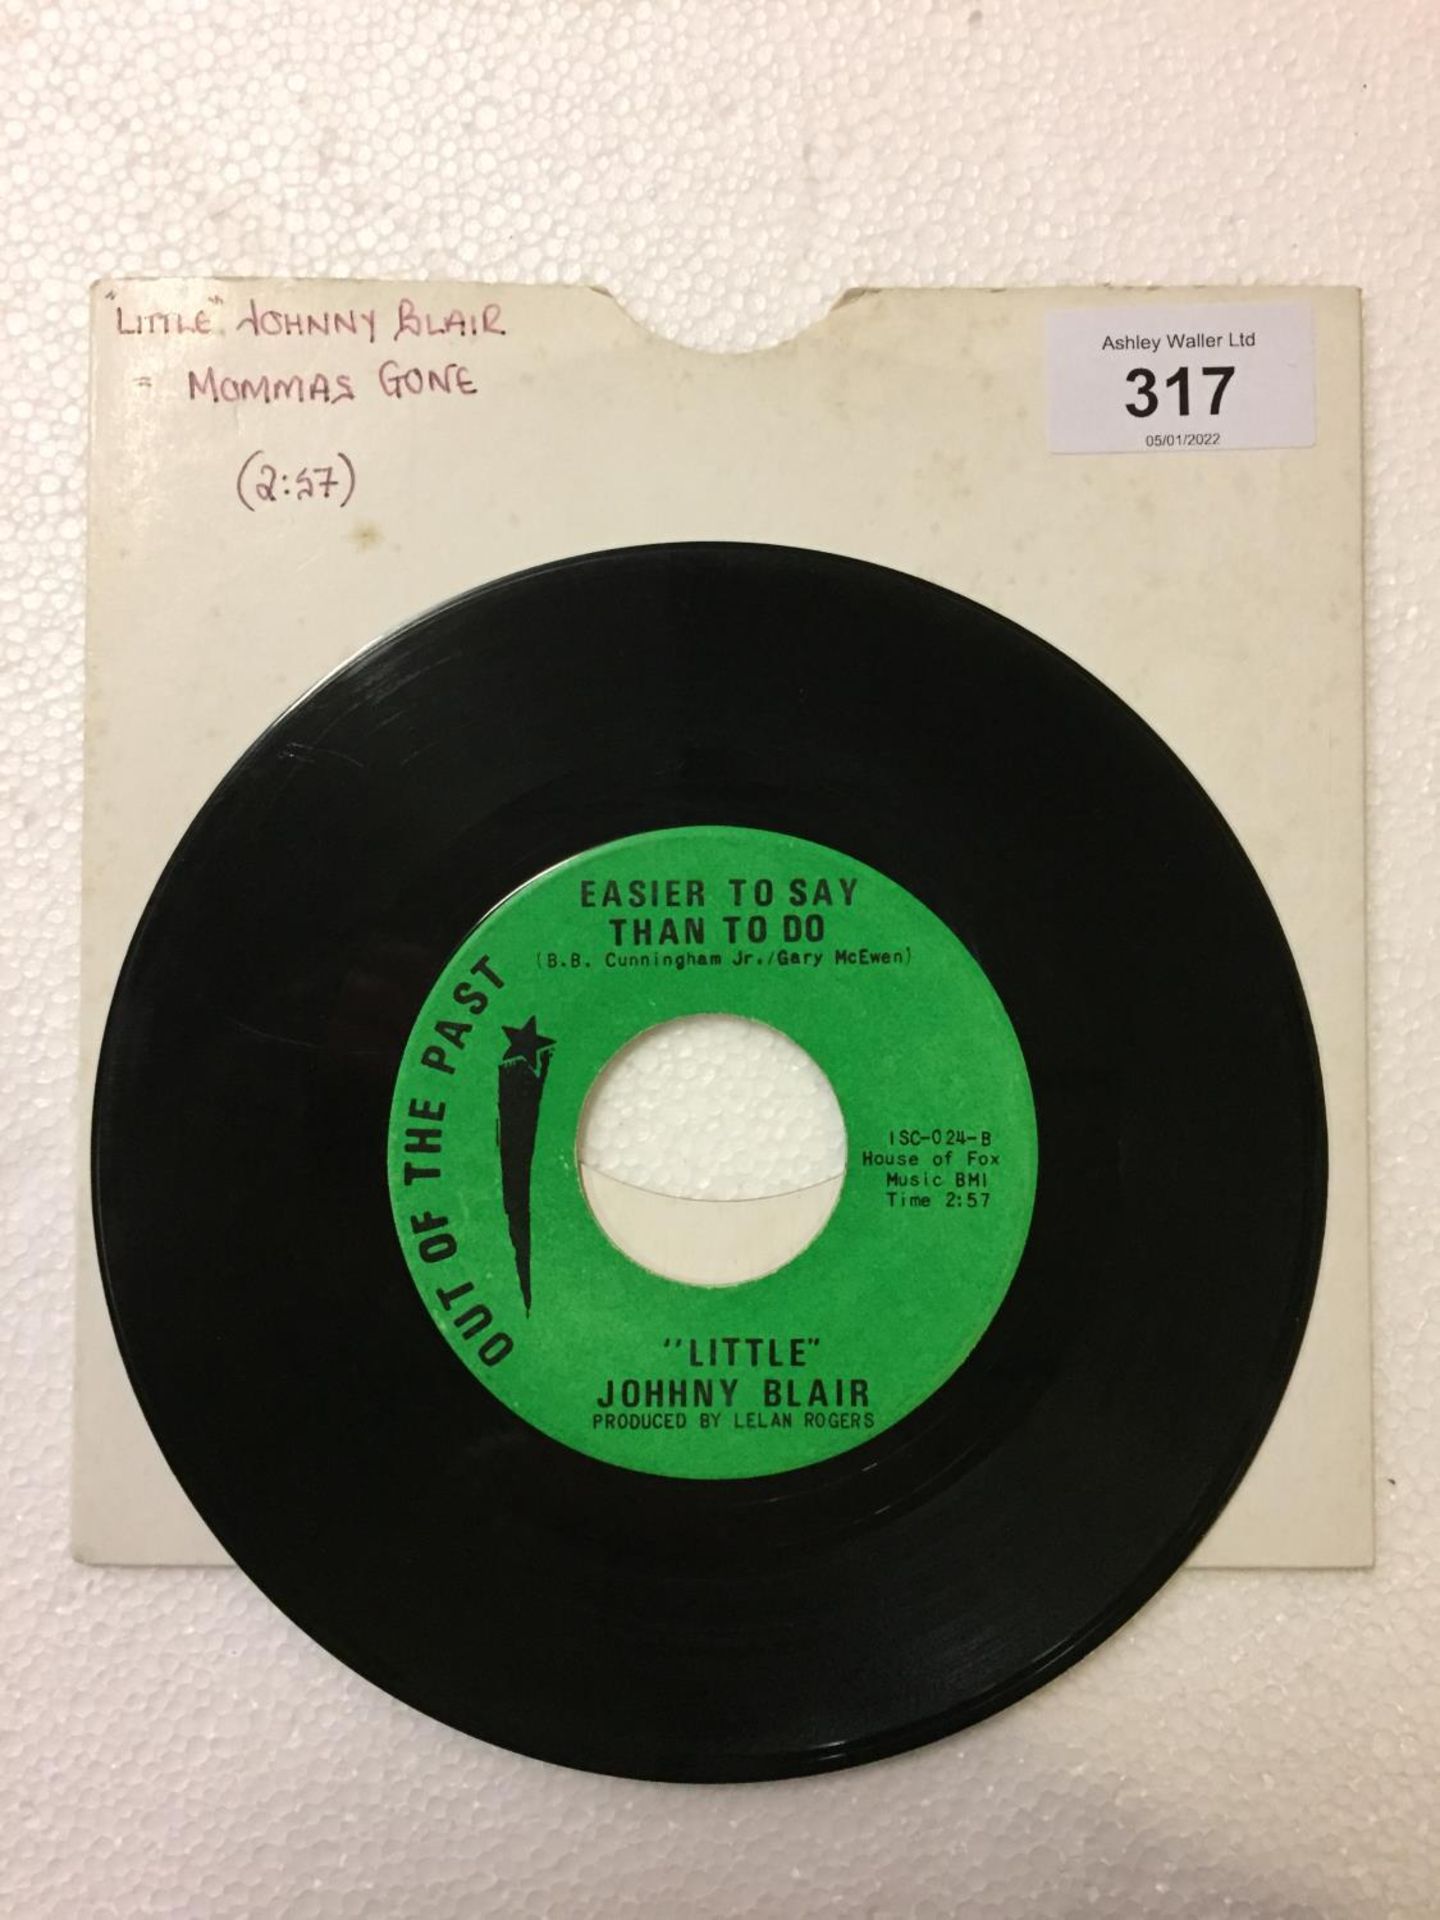 A 7 INCH VINYL FUNK / SOUL RECORD 'MOMMAS GONE' BY LITTLE JOHNNY BLAIR (PRINTED ERROR OF ARTIST'S - Image 2 of 2